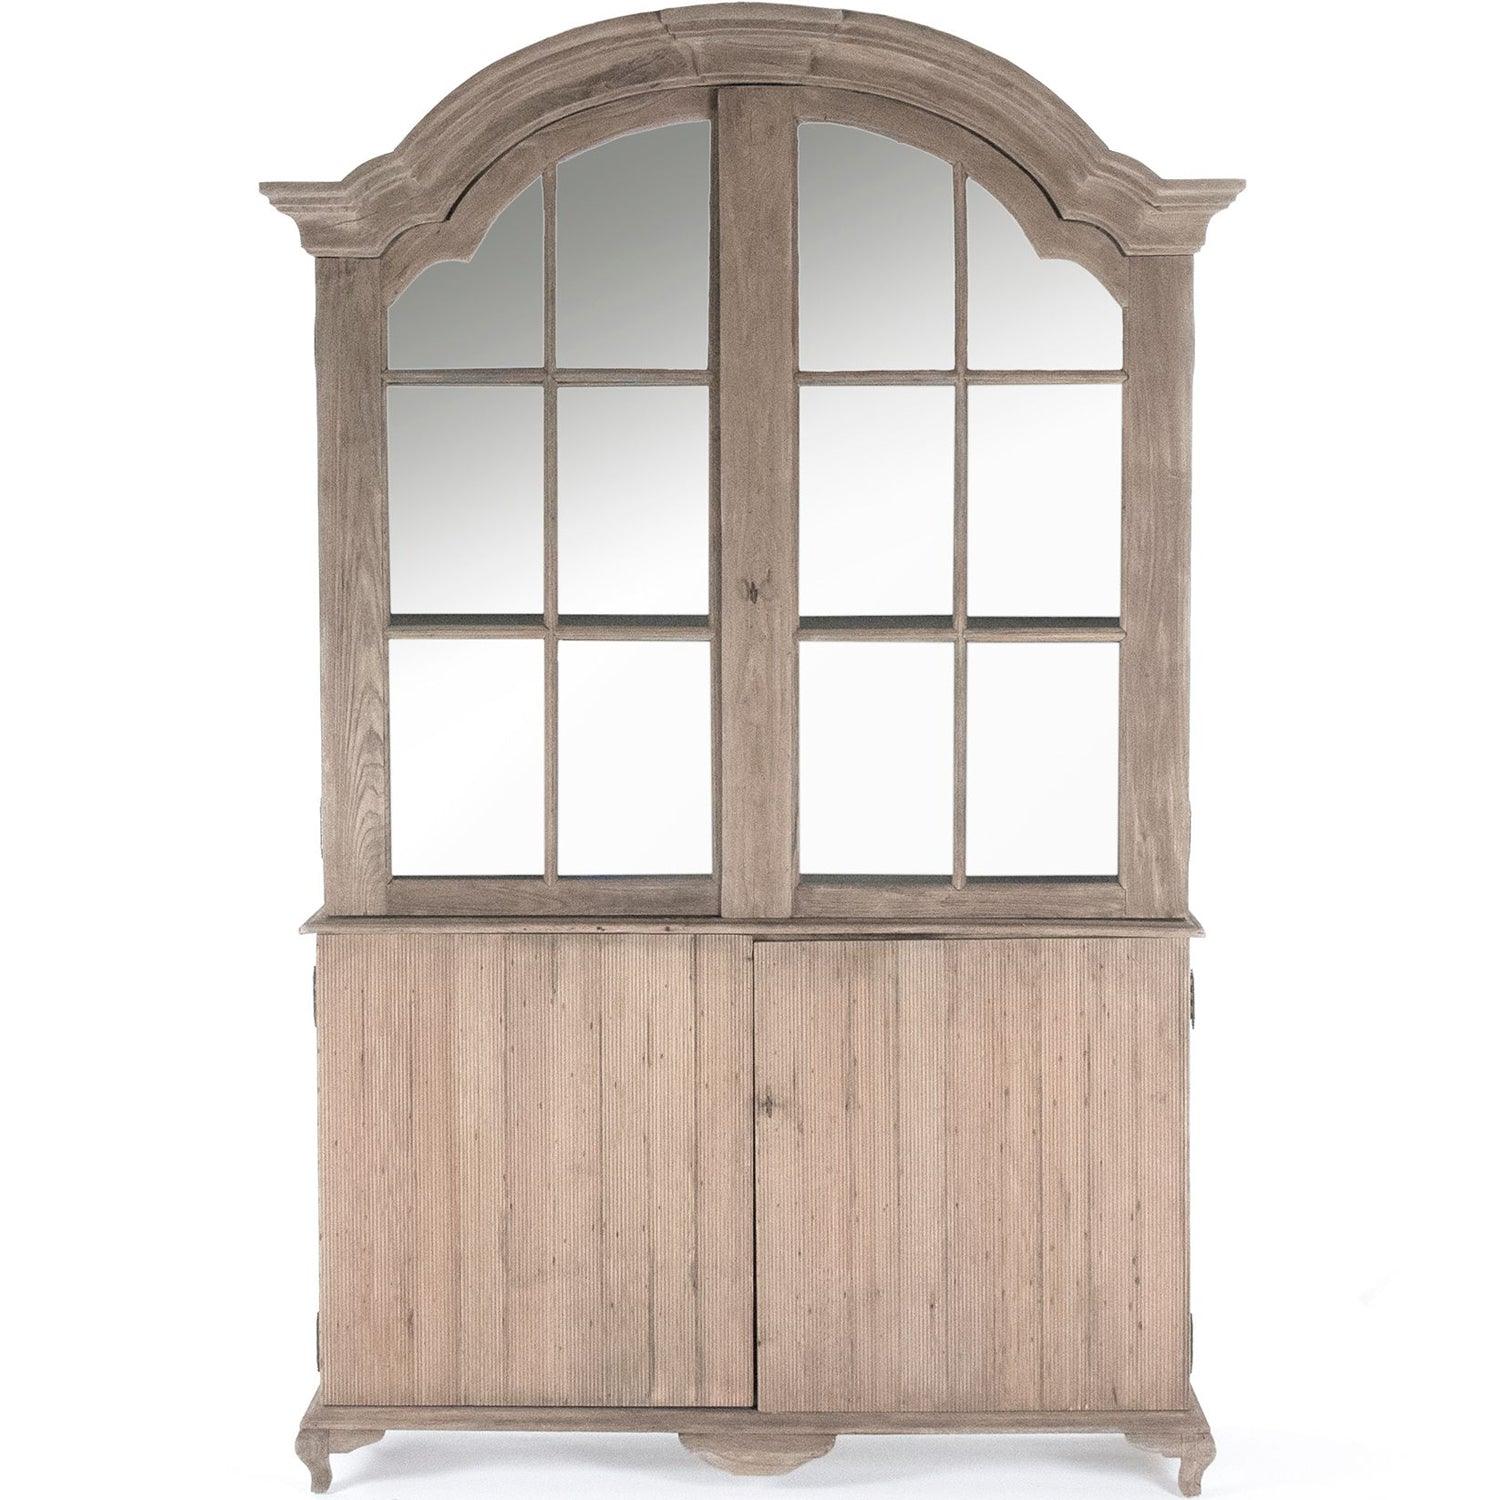 Arched French Country Display Hutch - Belle Escape